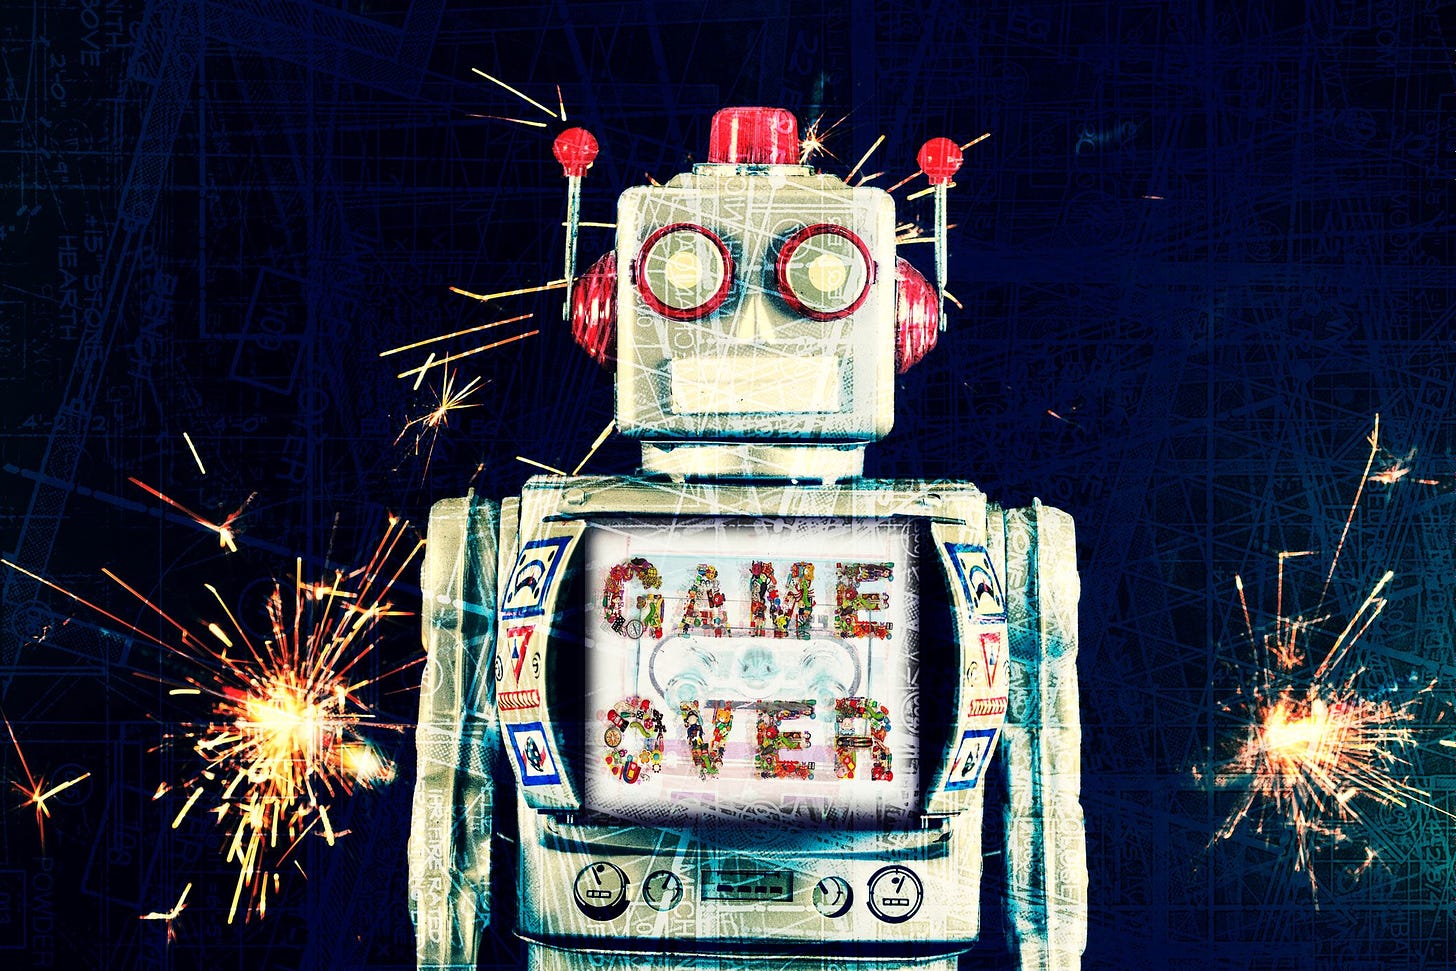 Robot with the words "GAME OVER" written on its chest.